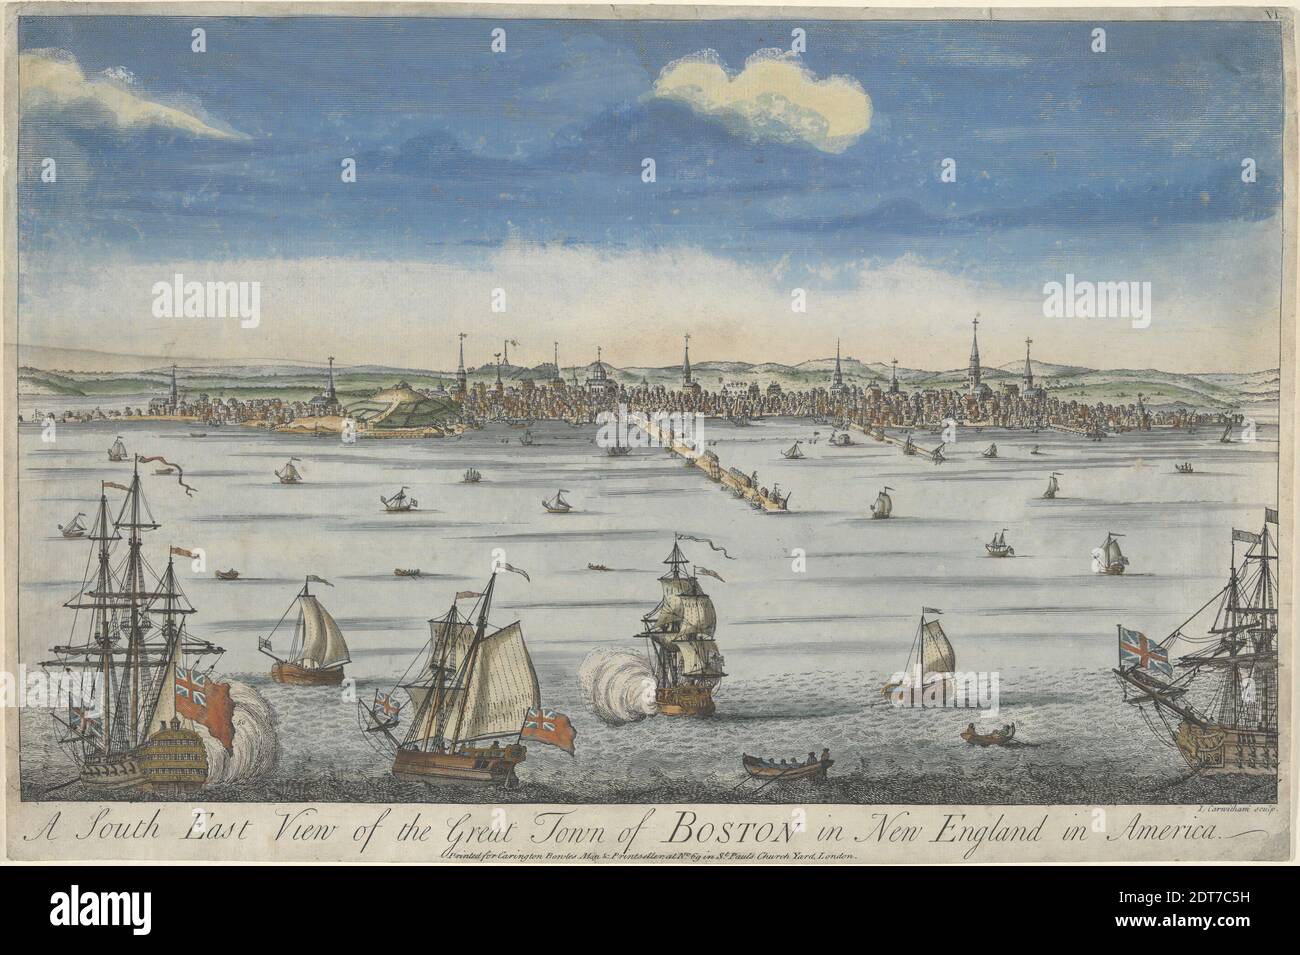 Artist: John Carwitham, British, active 1723–41, After: William Burgis, American, active 1716–31, A South East View of the Great Town of Boston in New England…, probably 1731–1736, Colored engraving, sheet: 29.85 × 44.77 cm (11 3/4 × 17 5/8 in.), Boston and Philadelphia, two of the most important North American cities in the eighteenth century, were both maritime and commercial centers. Their harbors figure significantly in these two engravings (see 1946.9.1780), not just because the open water offered an unobstructed vista but also because the harbors played a dominant role in the cities Stock Photo